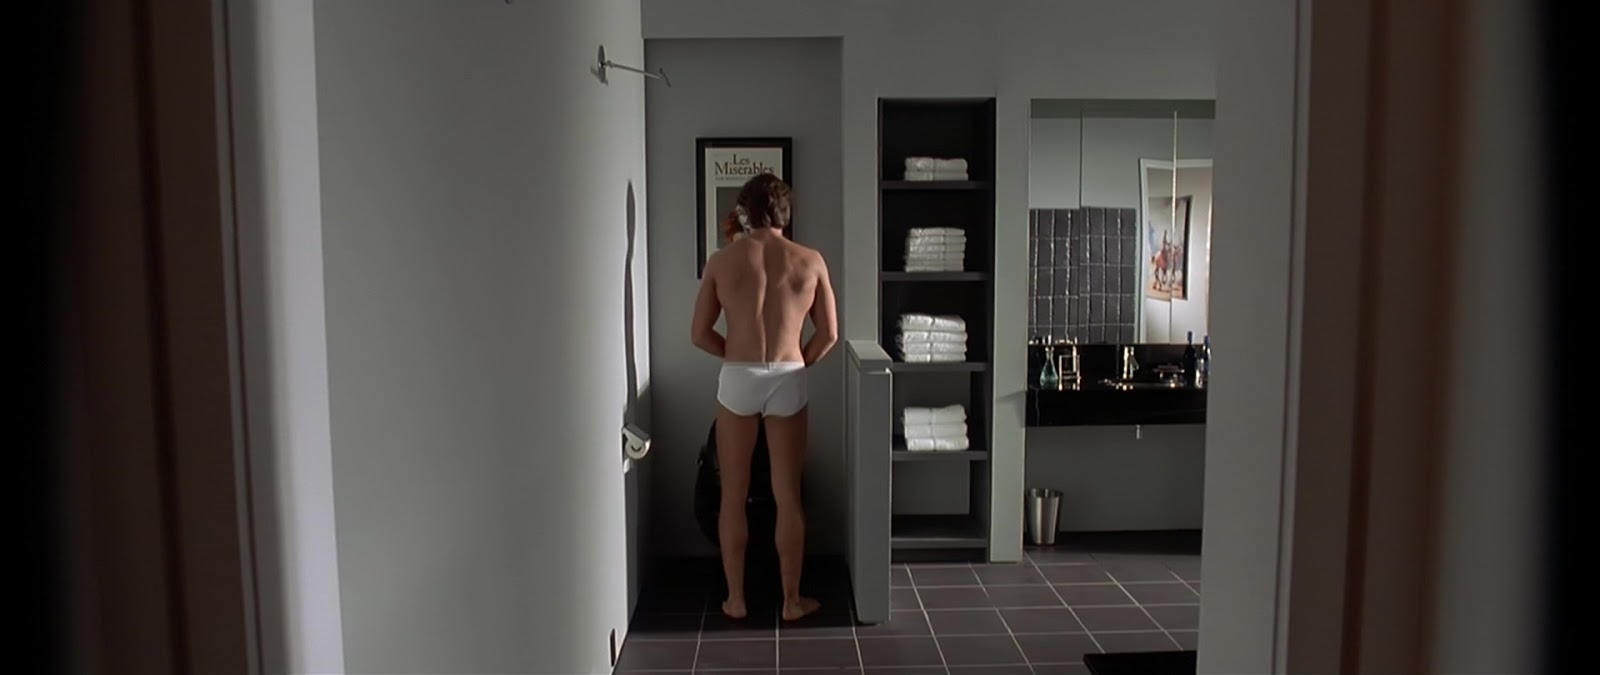 Christian Bale nude in American Psycho.